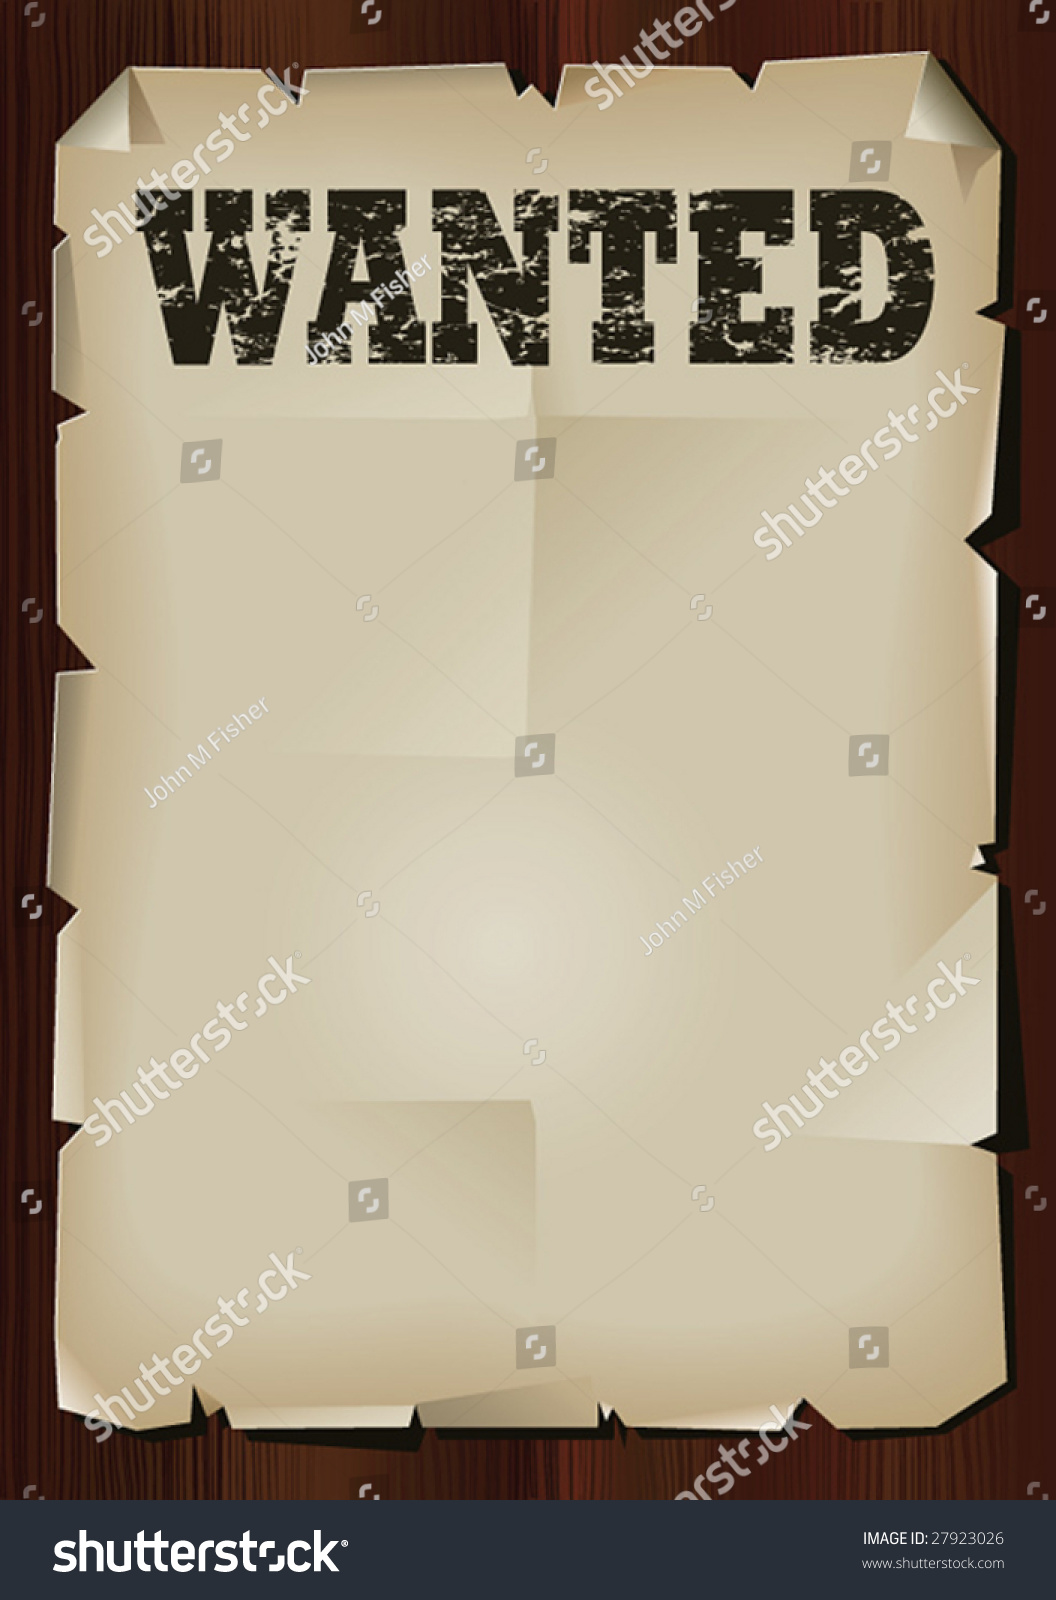 Wild West Wanted Poster Vector Format Stock Vector (Royalty Free) 27923026